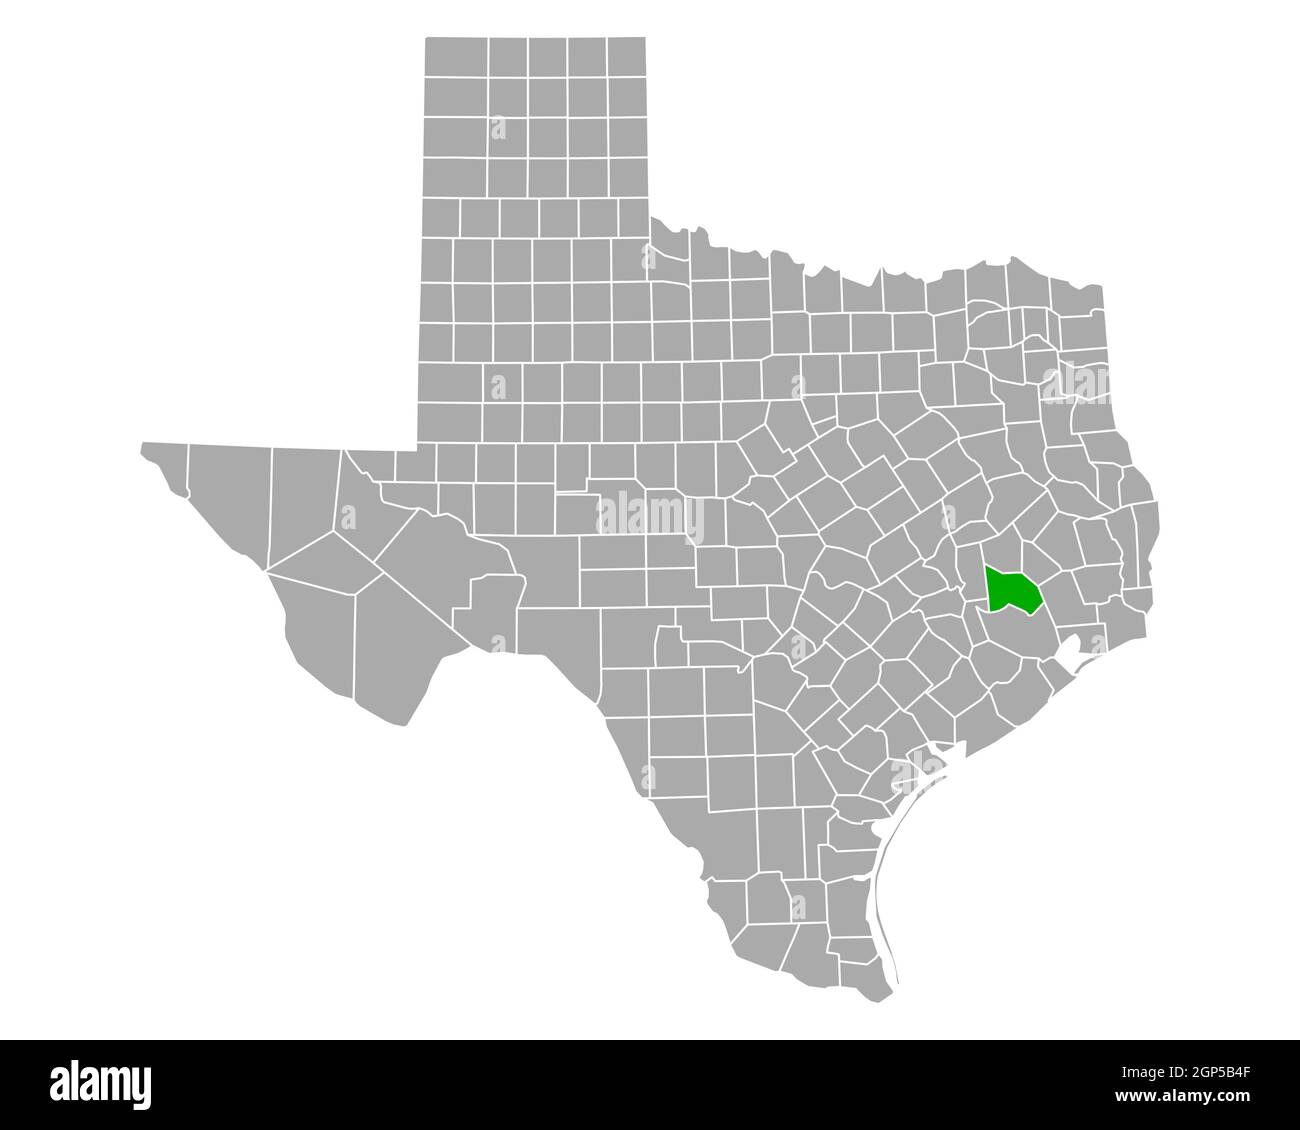 Map Of Montgomery In Texas 2GP5B4F 